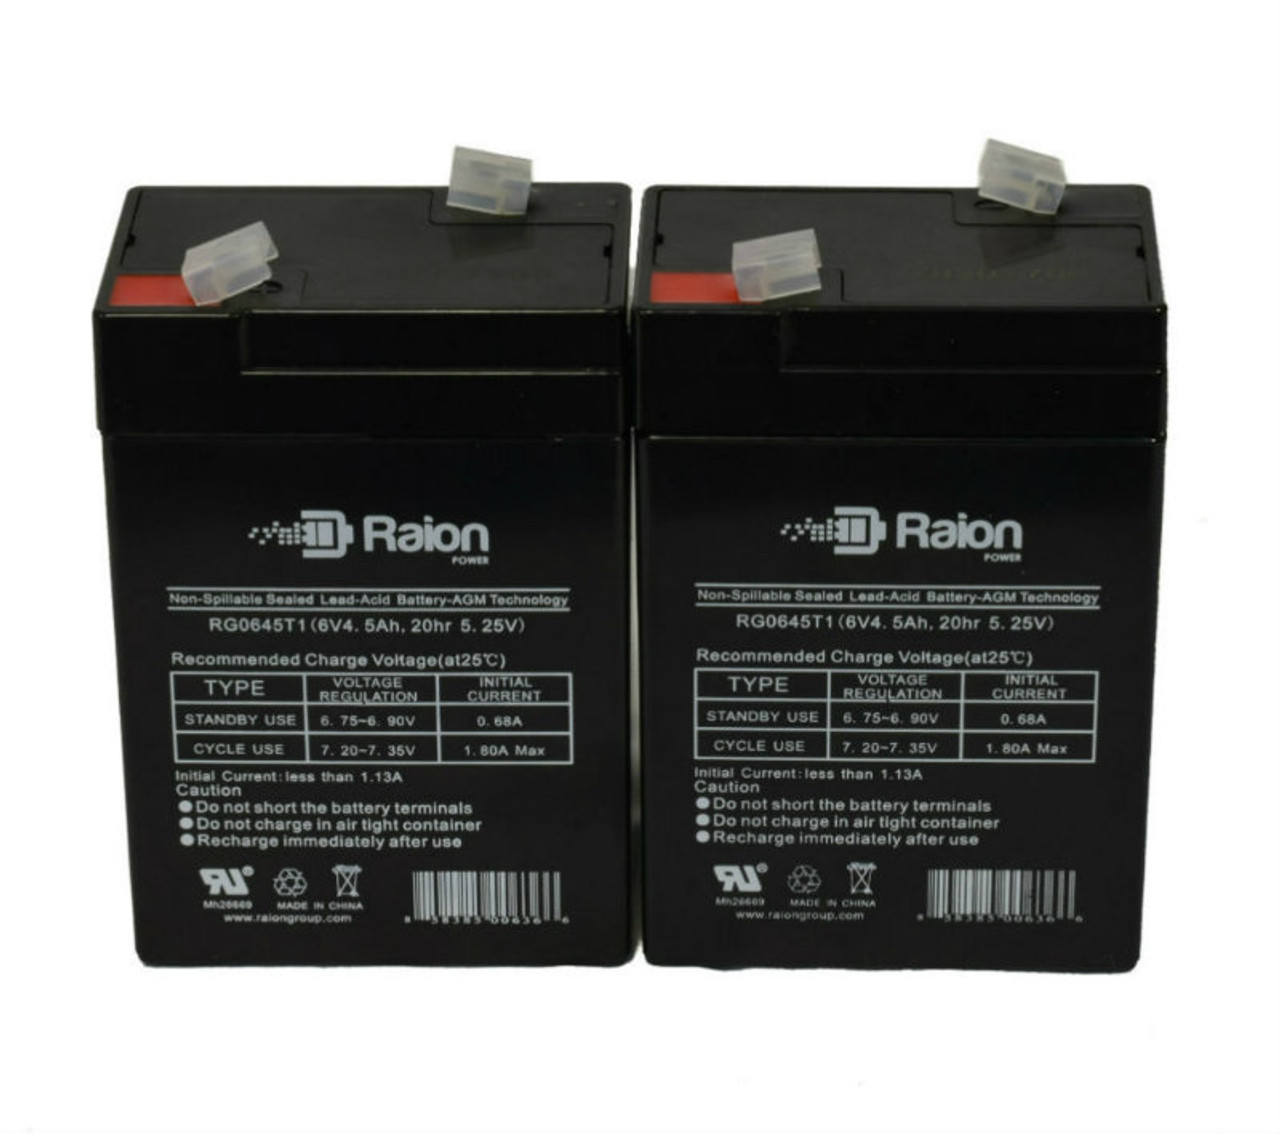 Raion Power 6 Volt 4.5Ah RG0645T1 Replacement Battery for LCB SP4-6 - 2 Pack